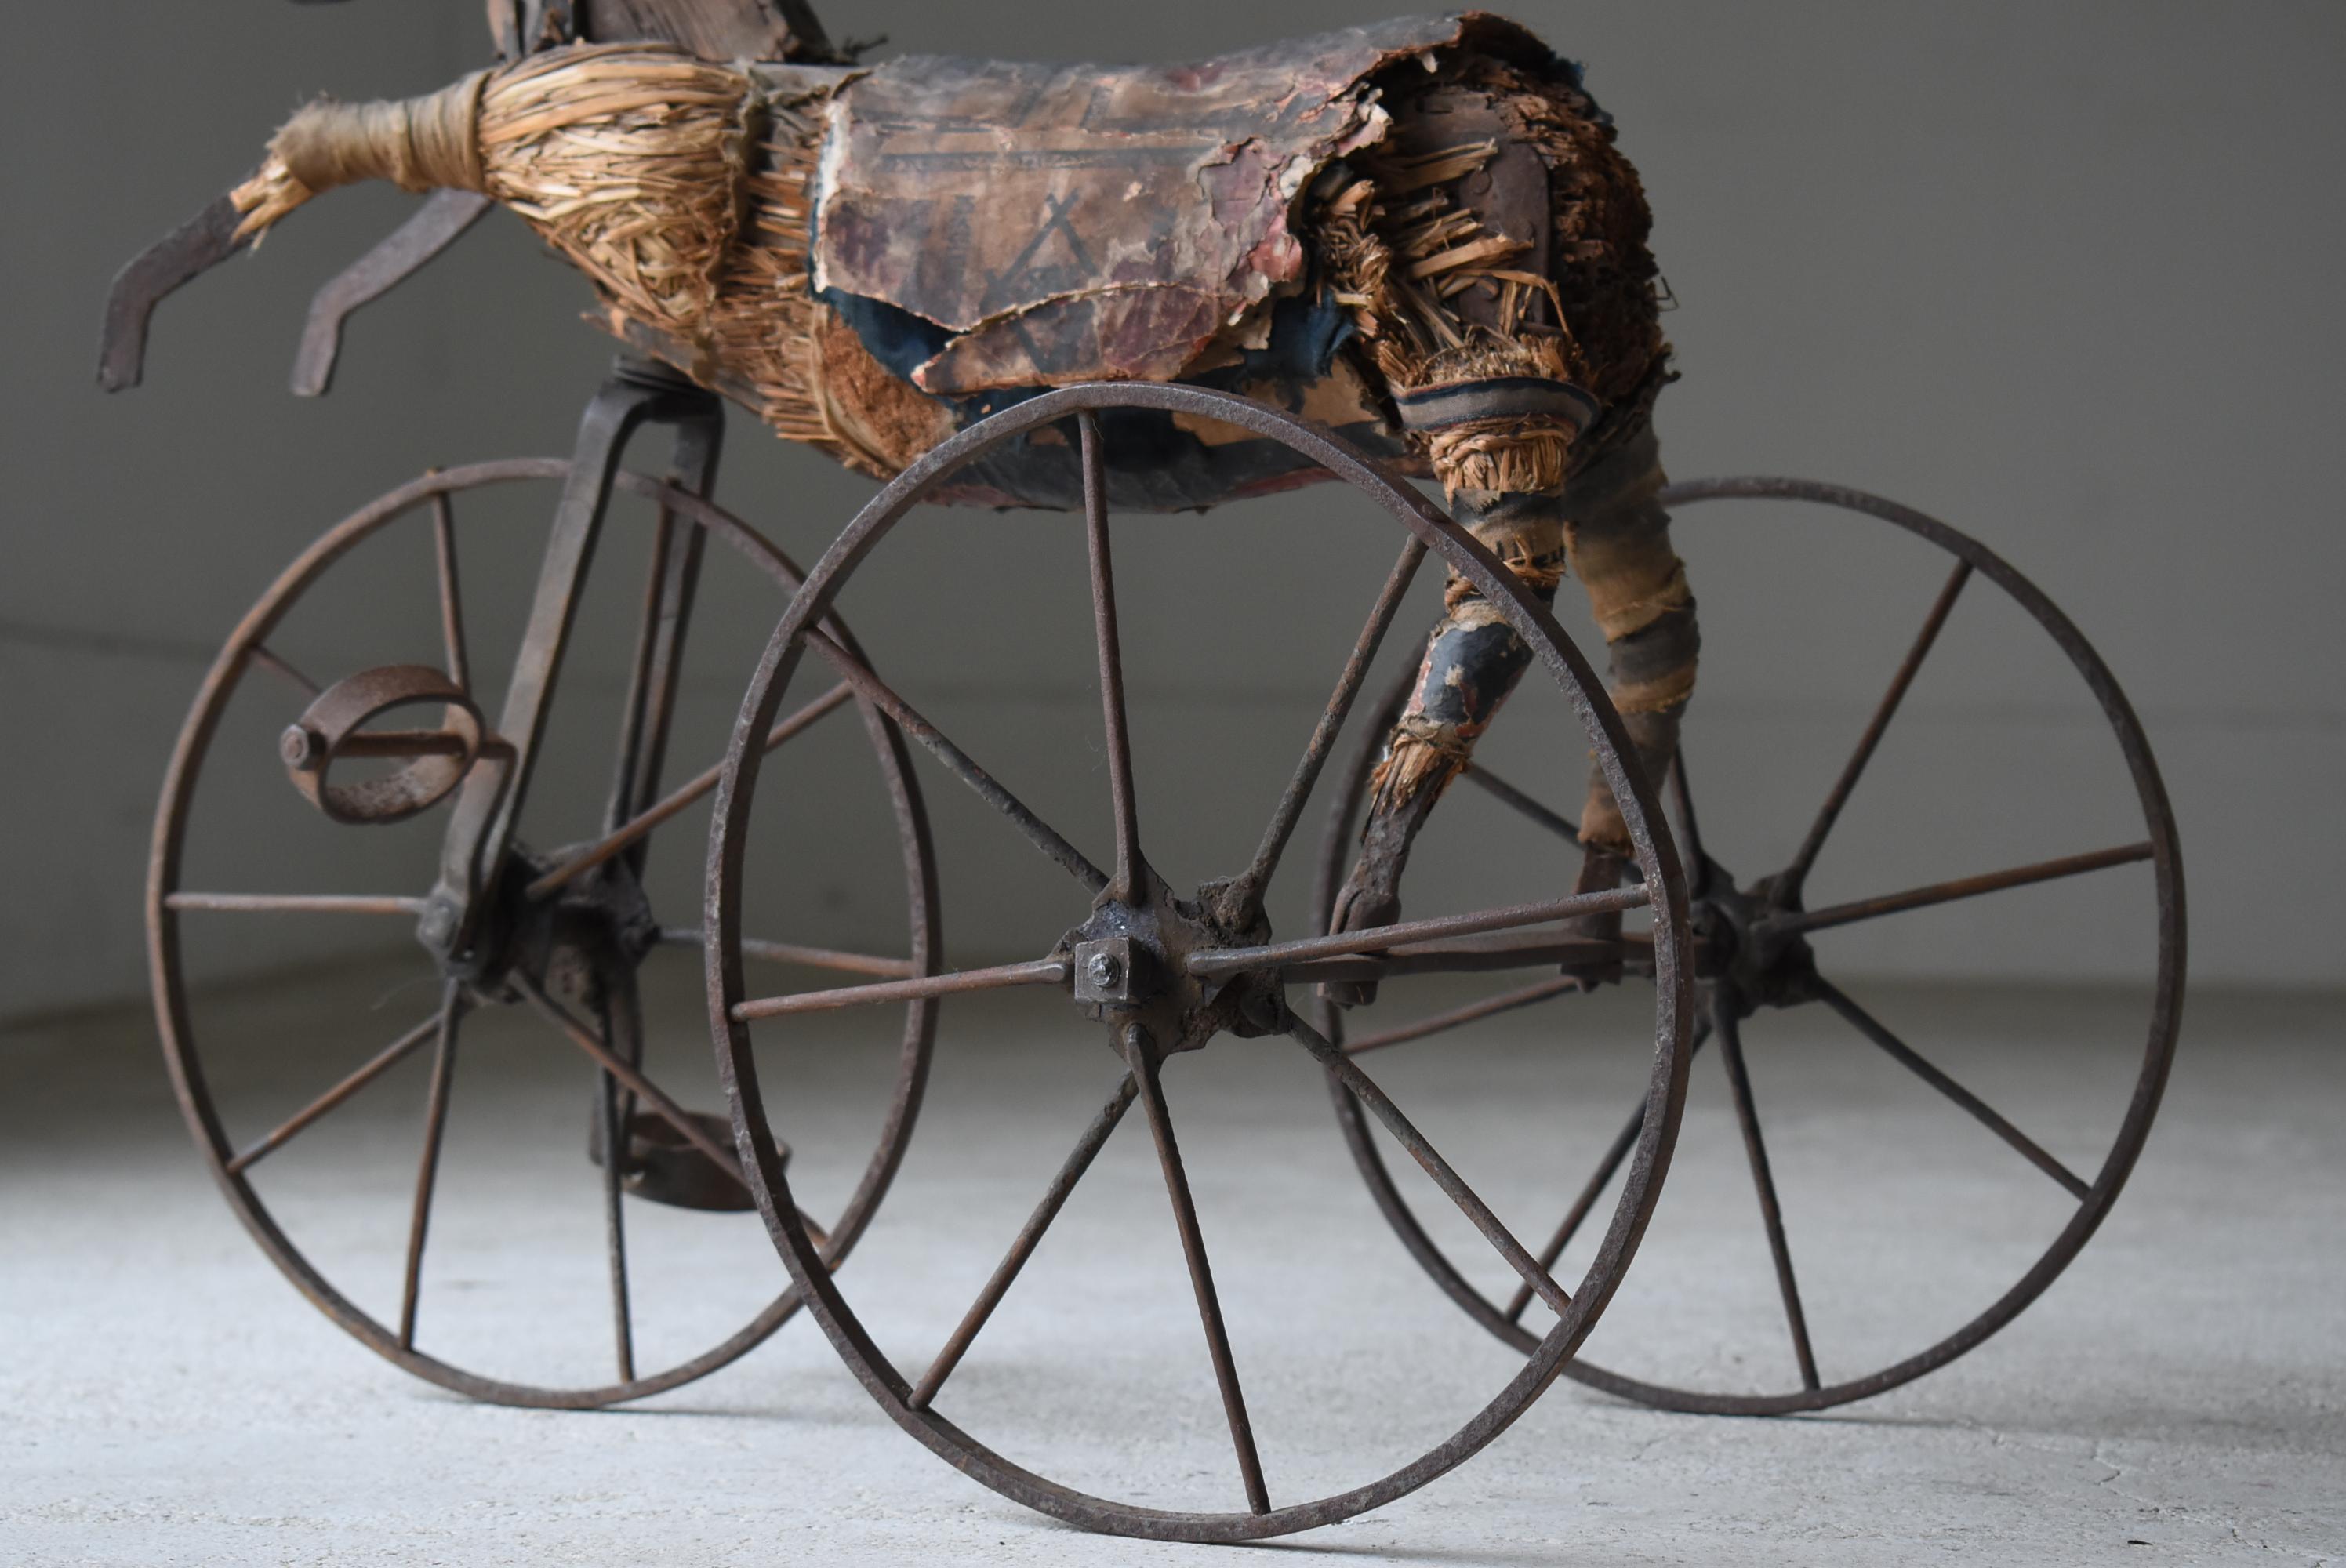 Japanese Antique Wooden Horse Tricycle 1860s-1900s / Sculpture Wabisabi  For Sale 1